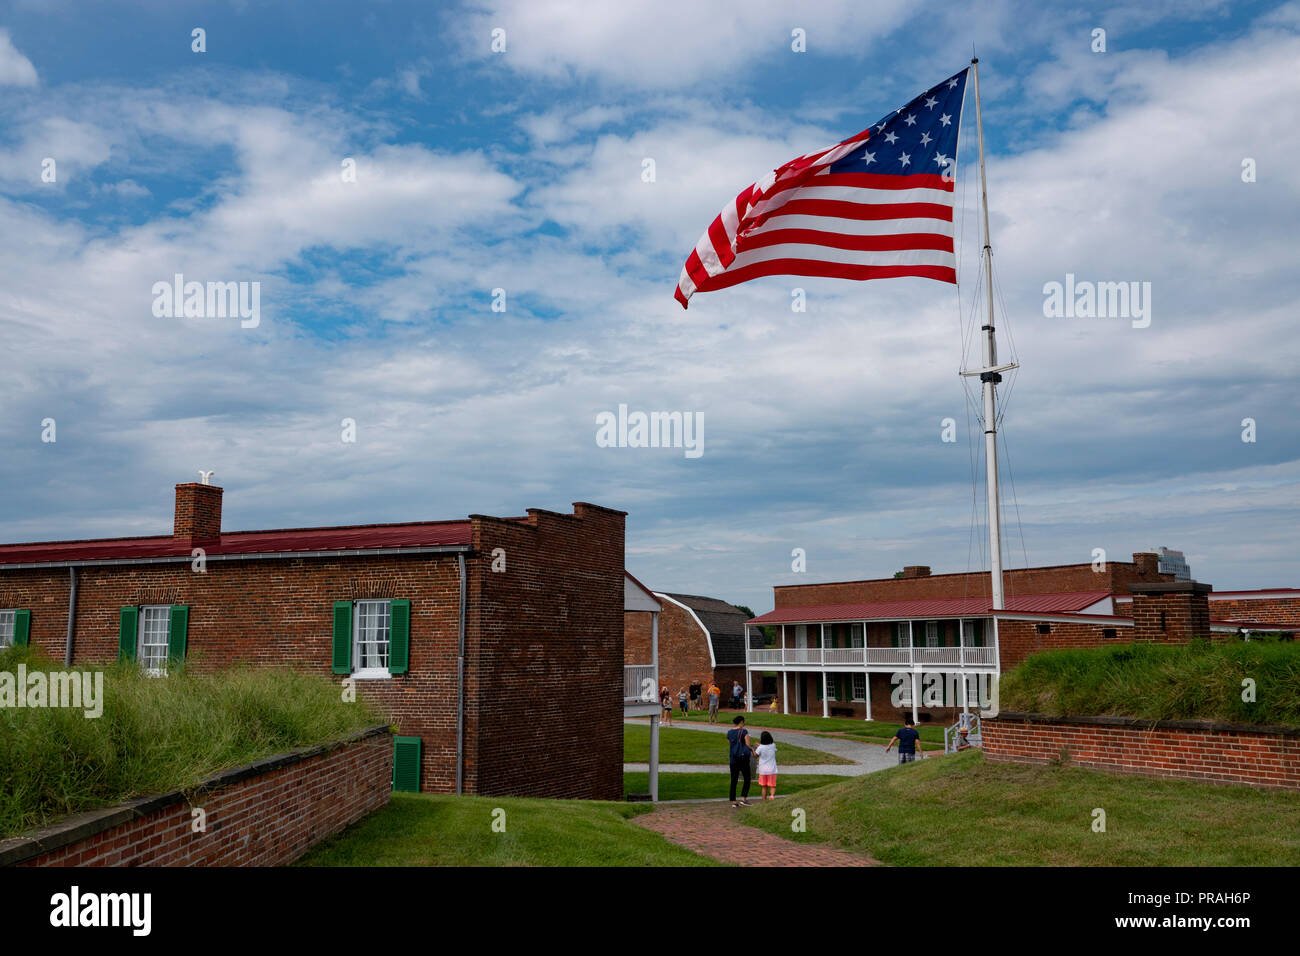 USA Maryland MD Baltimore Fort McHenry National Monument 15 star flags flies replica of the flag that flew during the battle the Francis Scott Key saw Stock Photo